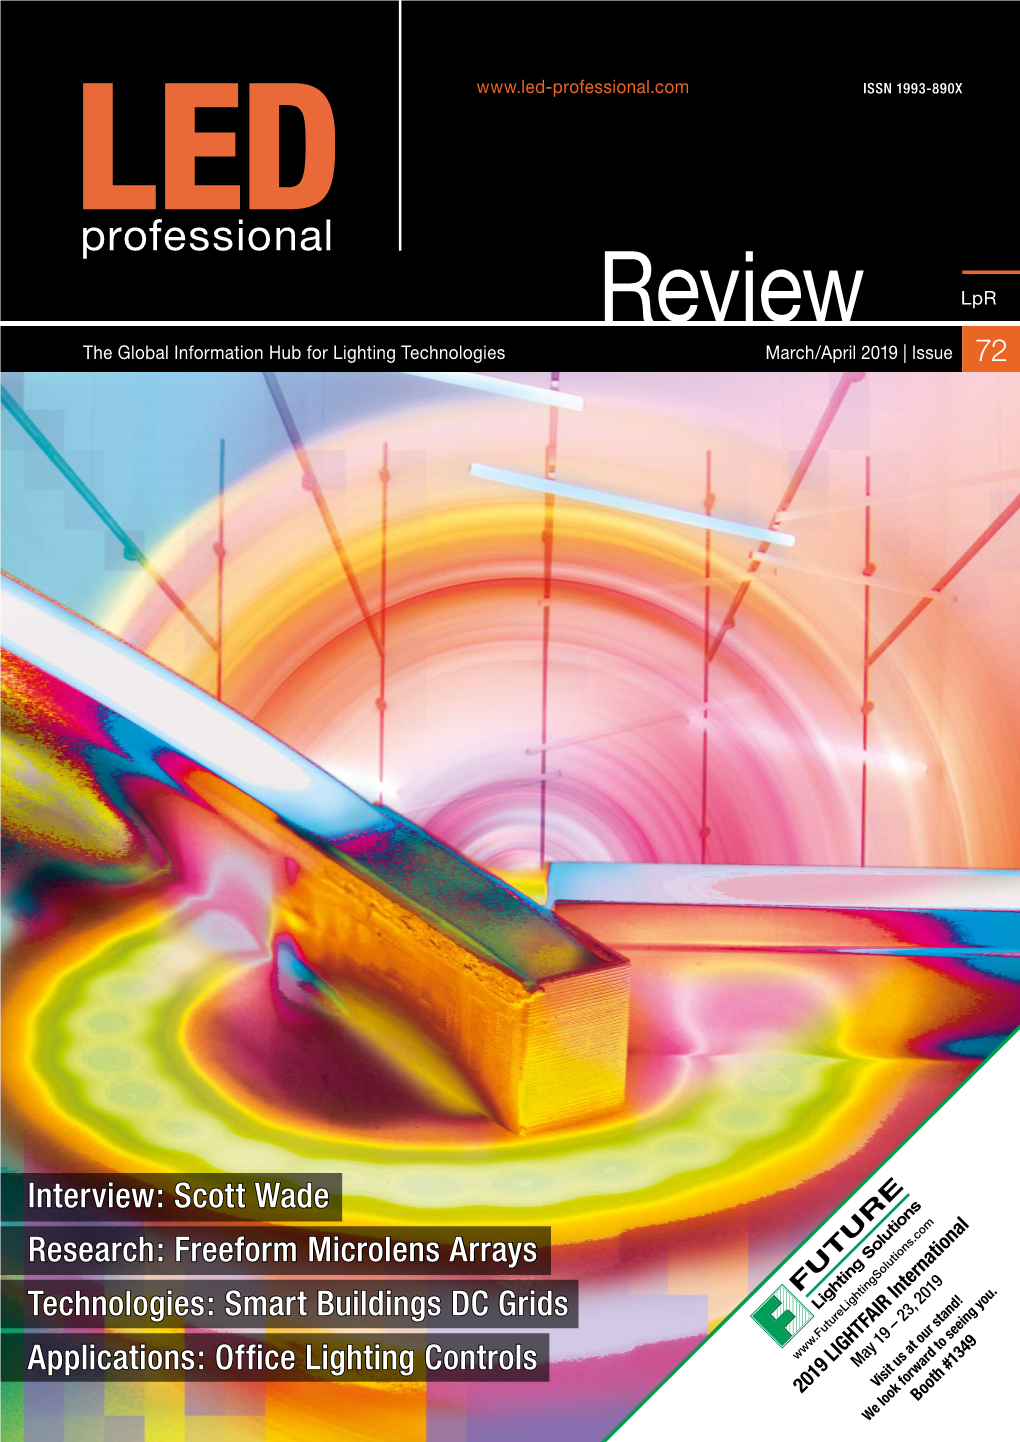 Review Lpr the Global Information Hub for Lighting Technologies March/April 2019 | Issue 72